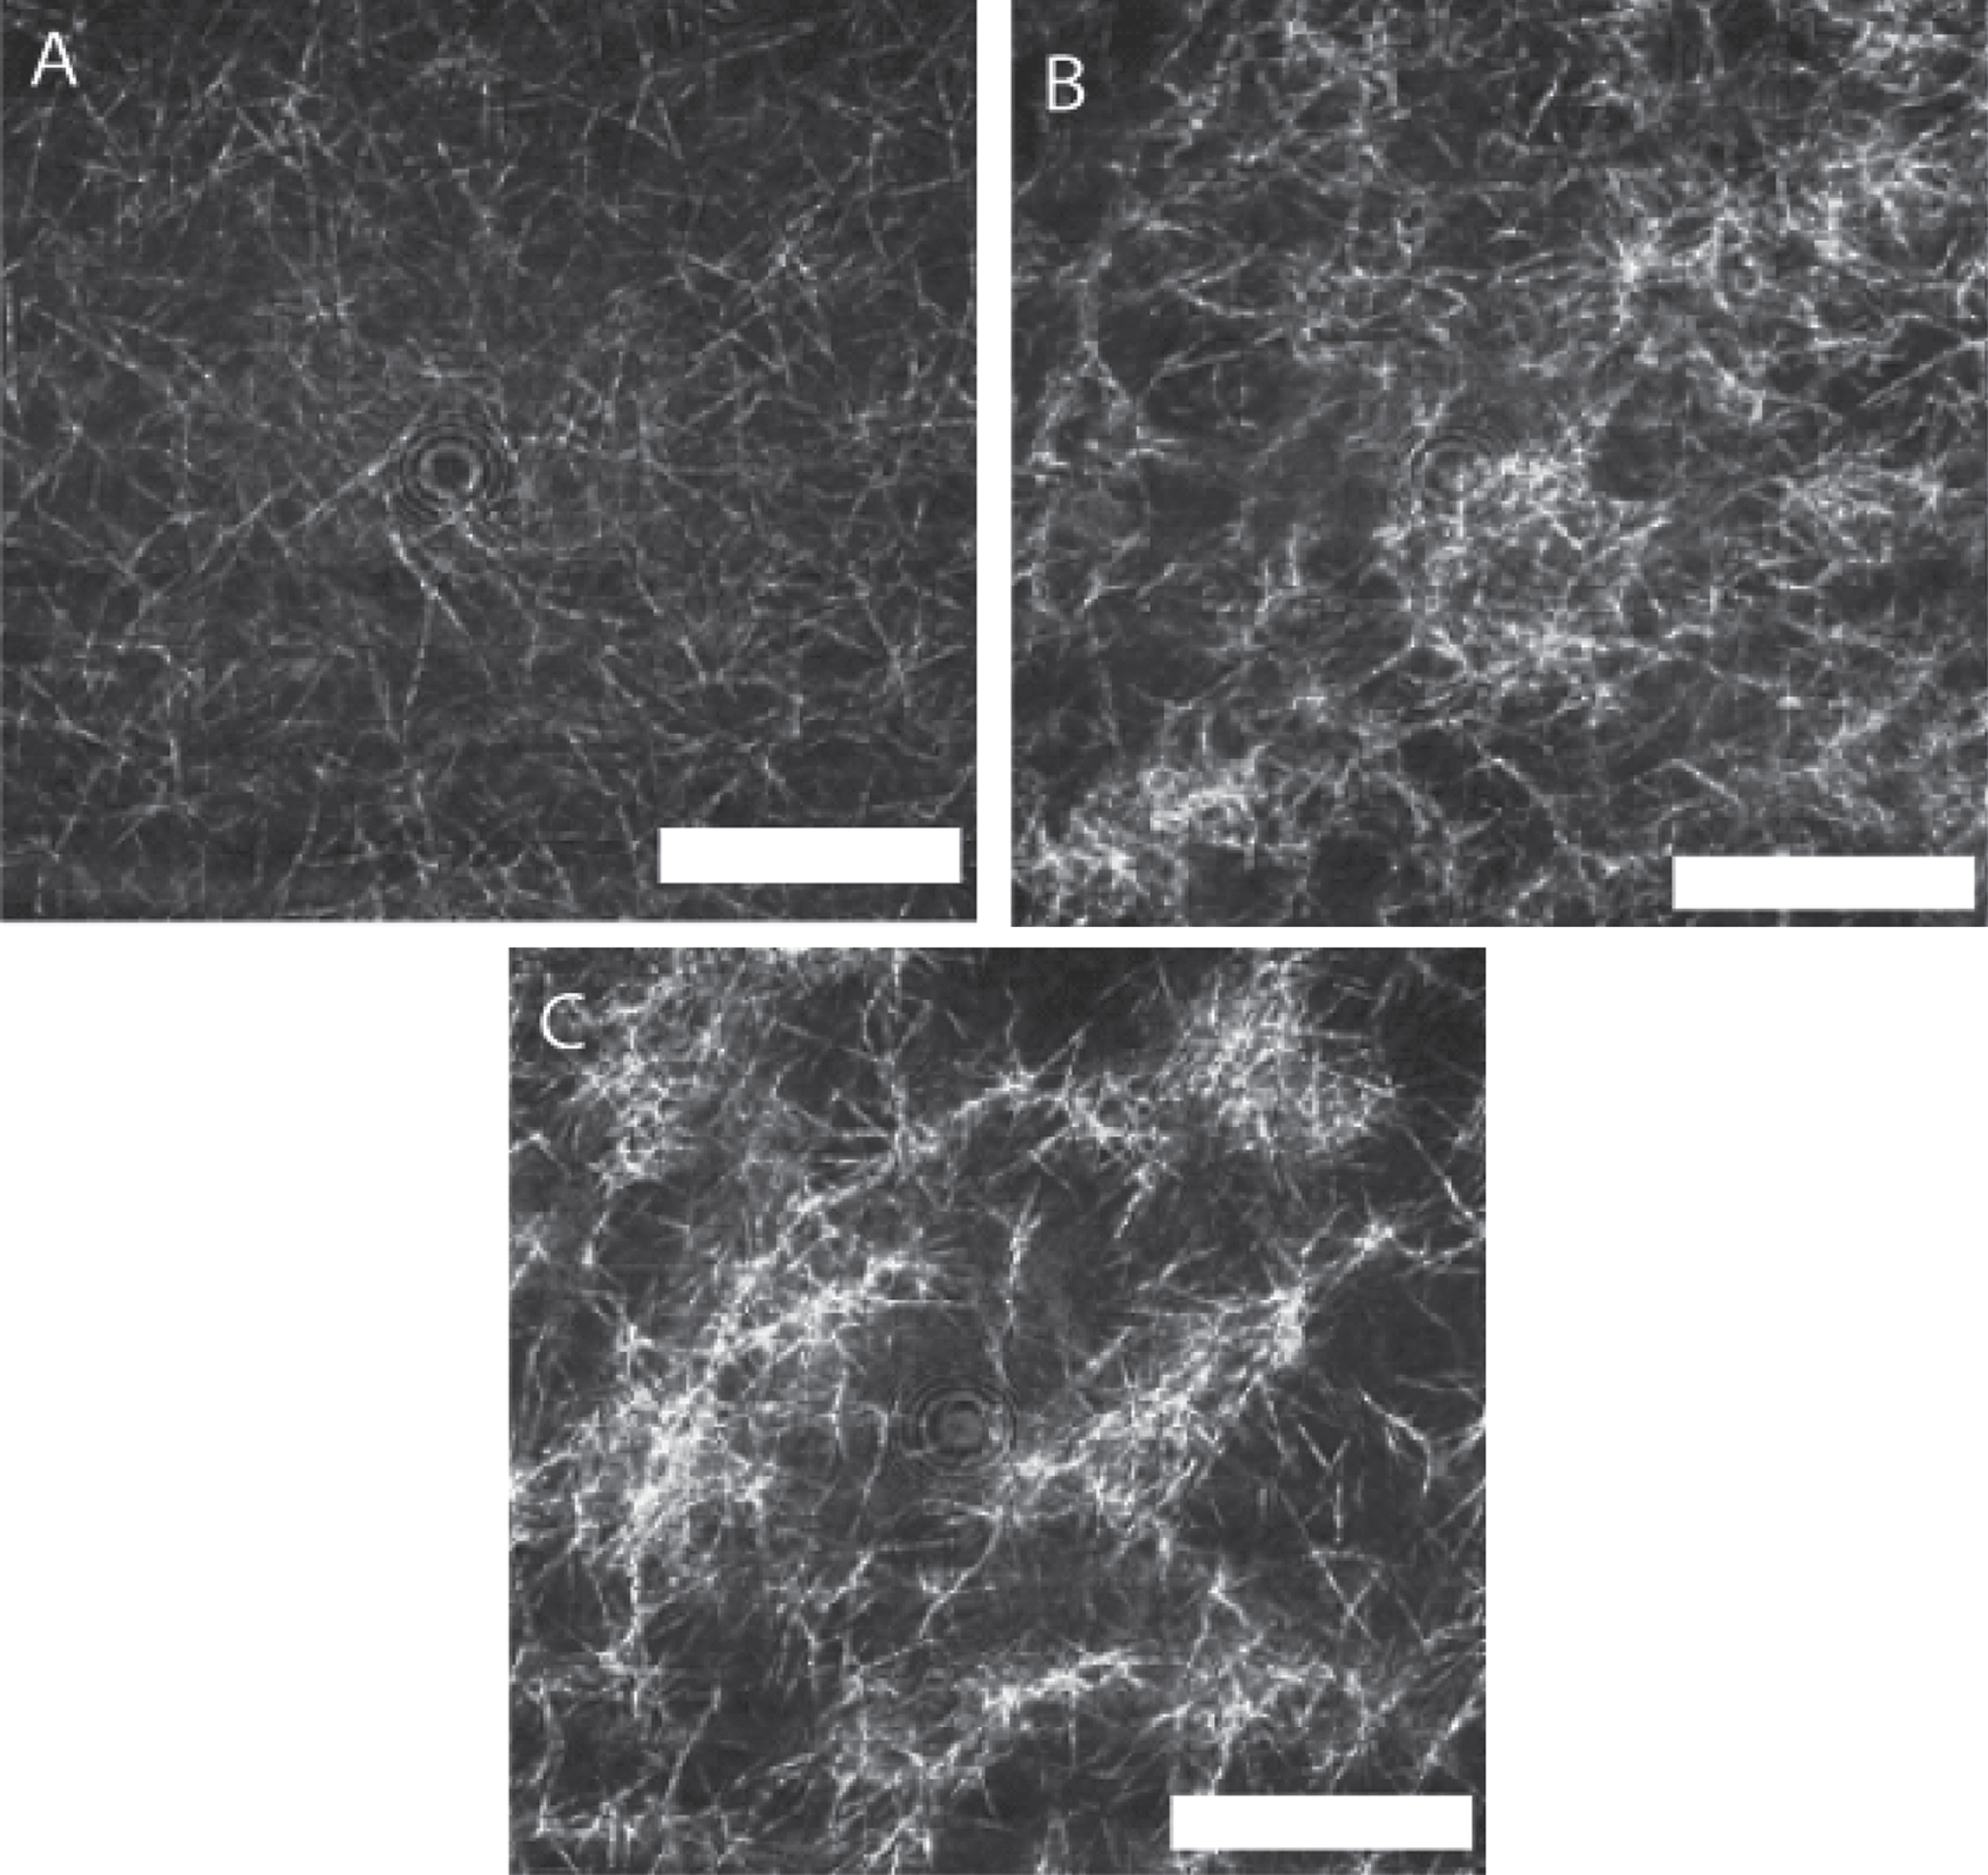 LSCM images of a fibrin gel formed under SAOS and those formed under CSPS at three different levels of shear stress. Fibrin gel network formed under (A) SAOS (σs= 0 Pa), (B) CSPS (σs= 0.1 Pa) and (C) CSPS (σs= 0.35 Pa) with the corresponding values of df being 1.99 (± 0.01), 2.03 (± 0.01) and 2.3 (± 0.05), respectively. The images were acquired immediately following the attainment of the GP in the rheometer. The scale bar width is 20 μm.